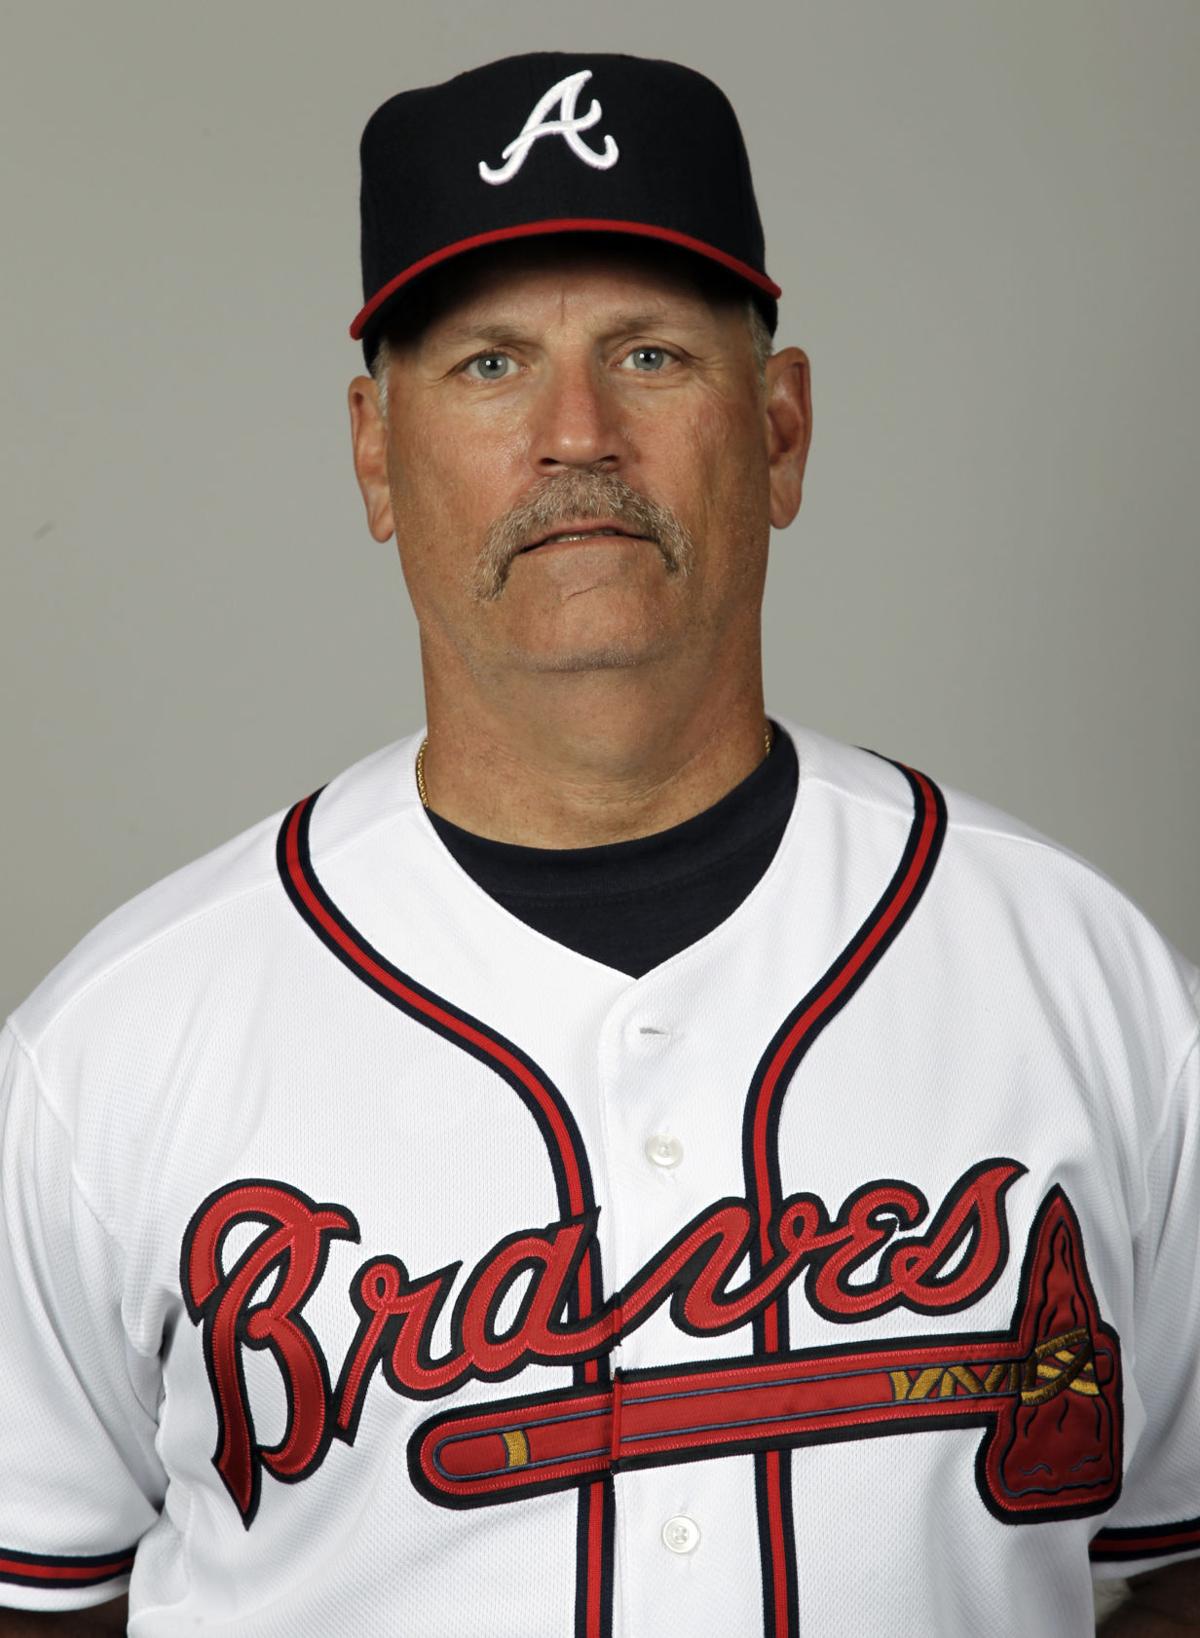 Congratulations to M-Braves pitcher - Mississippi Braves